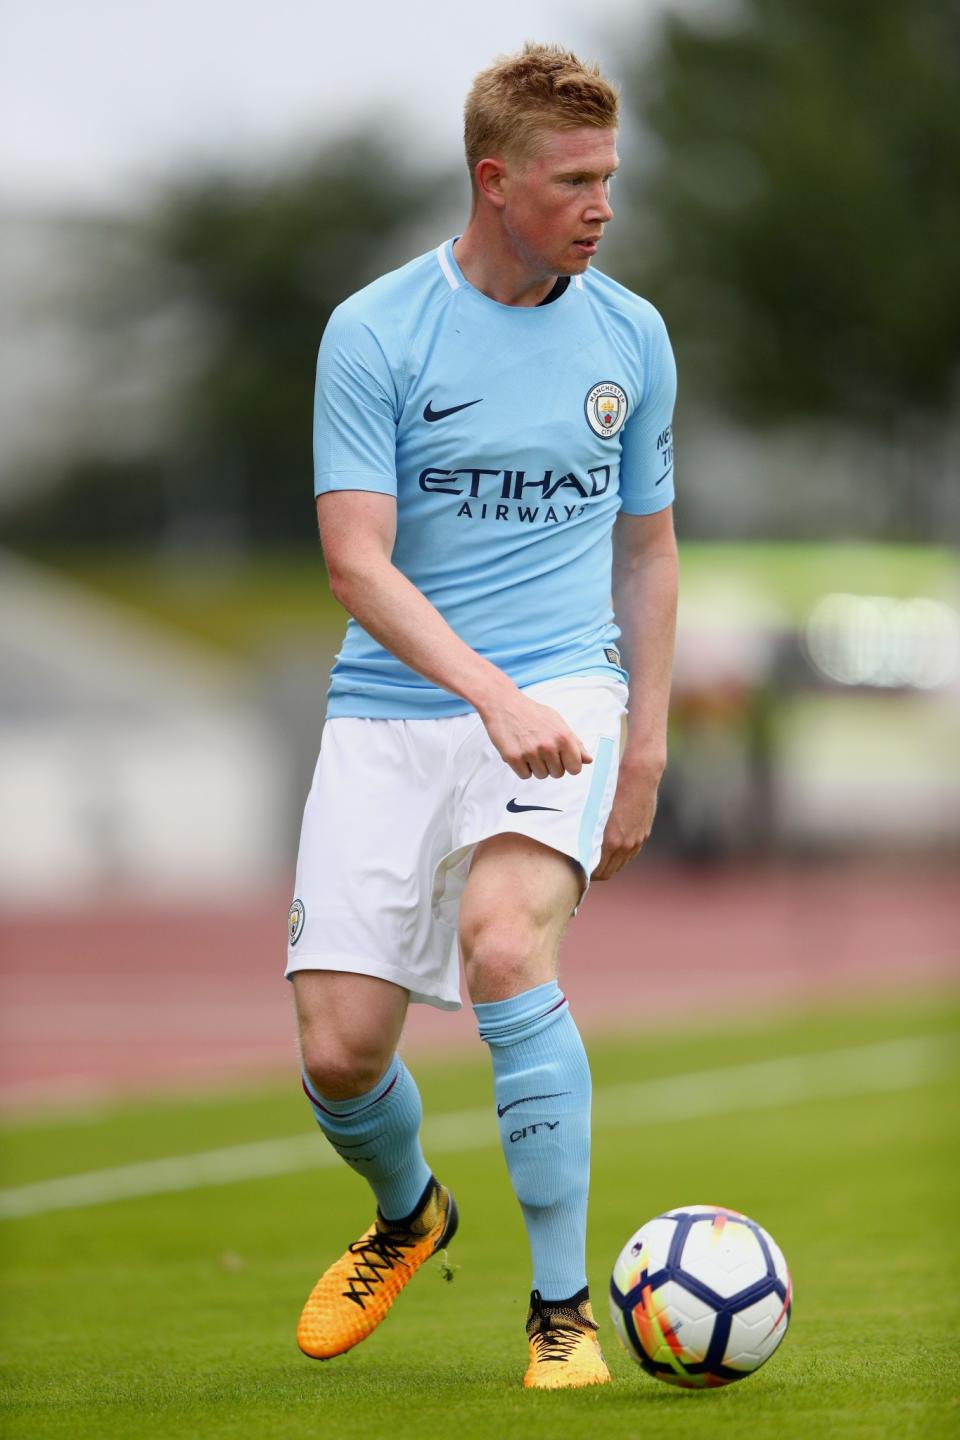 Kevin de Bruyne is a scorer and provider